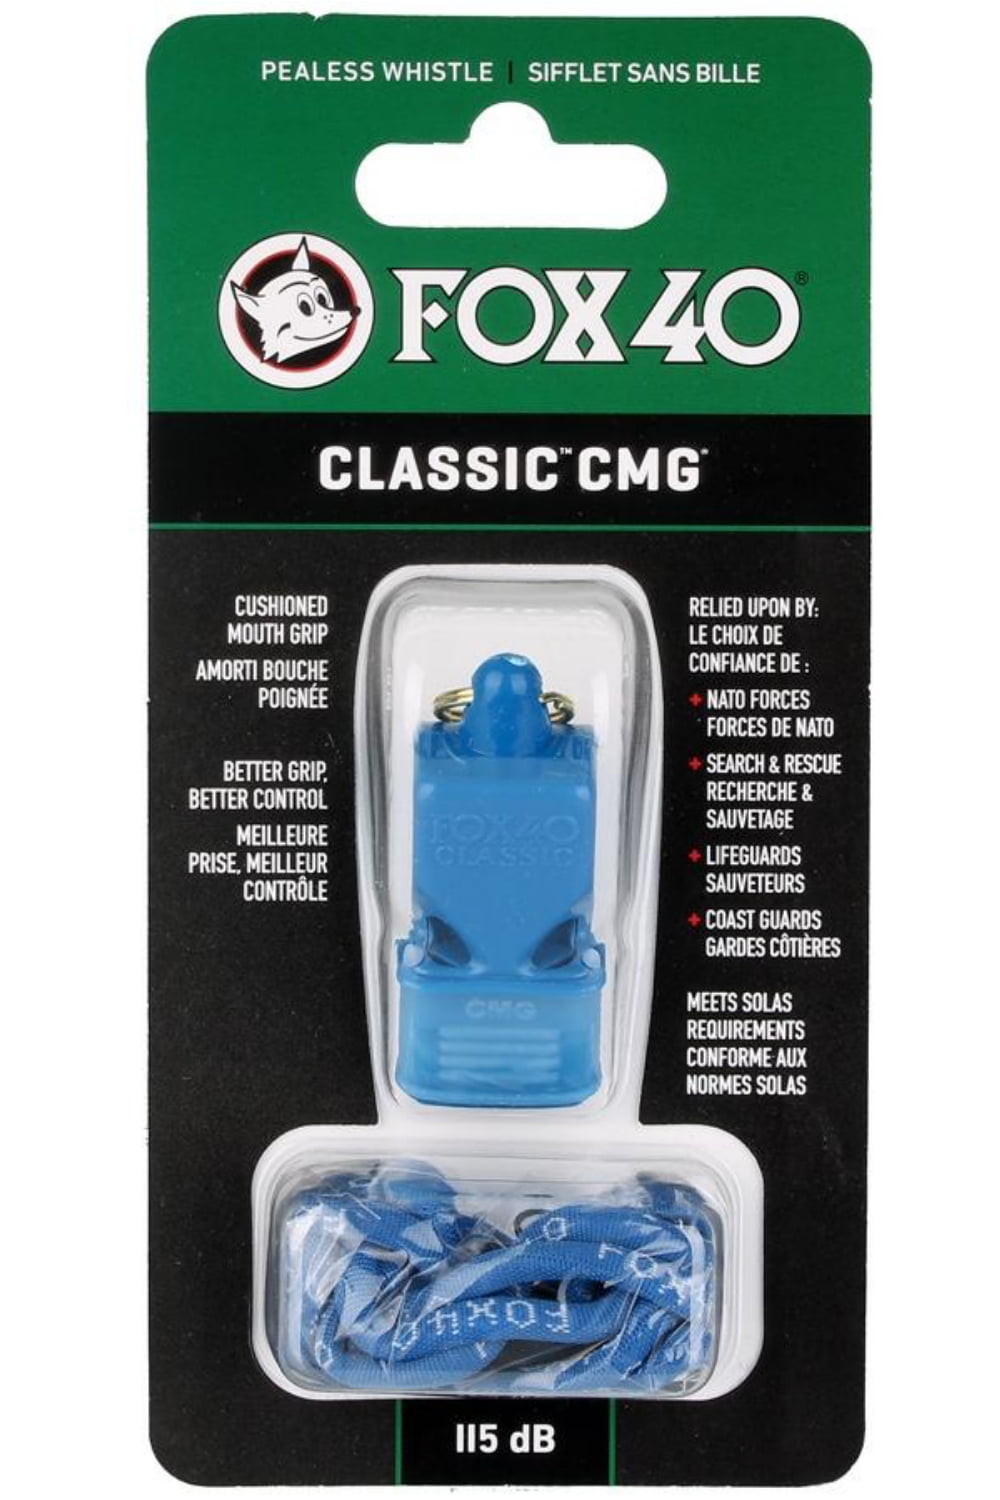 FOX 40 Classic CMG  Training Soccer Pealess Whistle Lanyard 9603 Series 